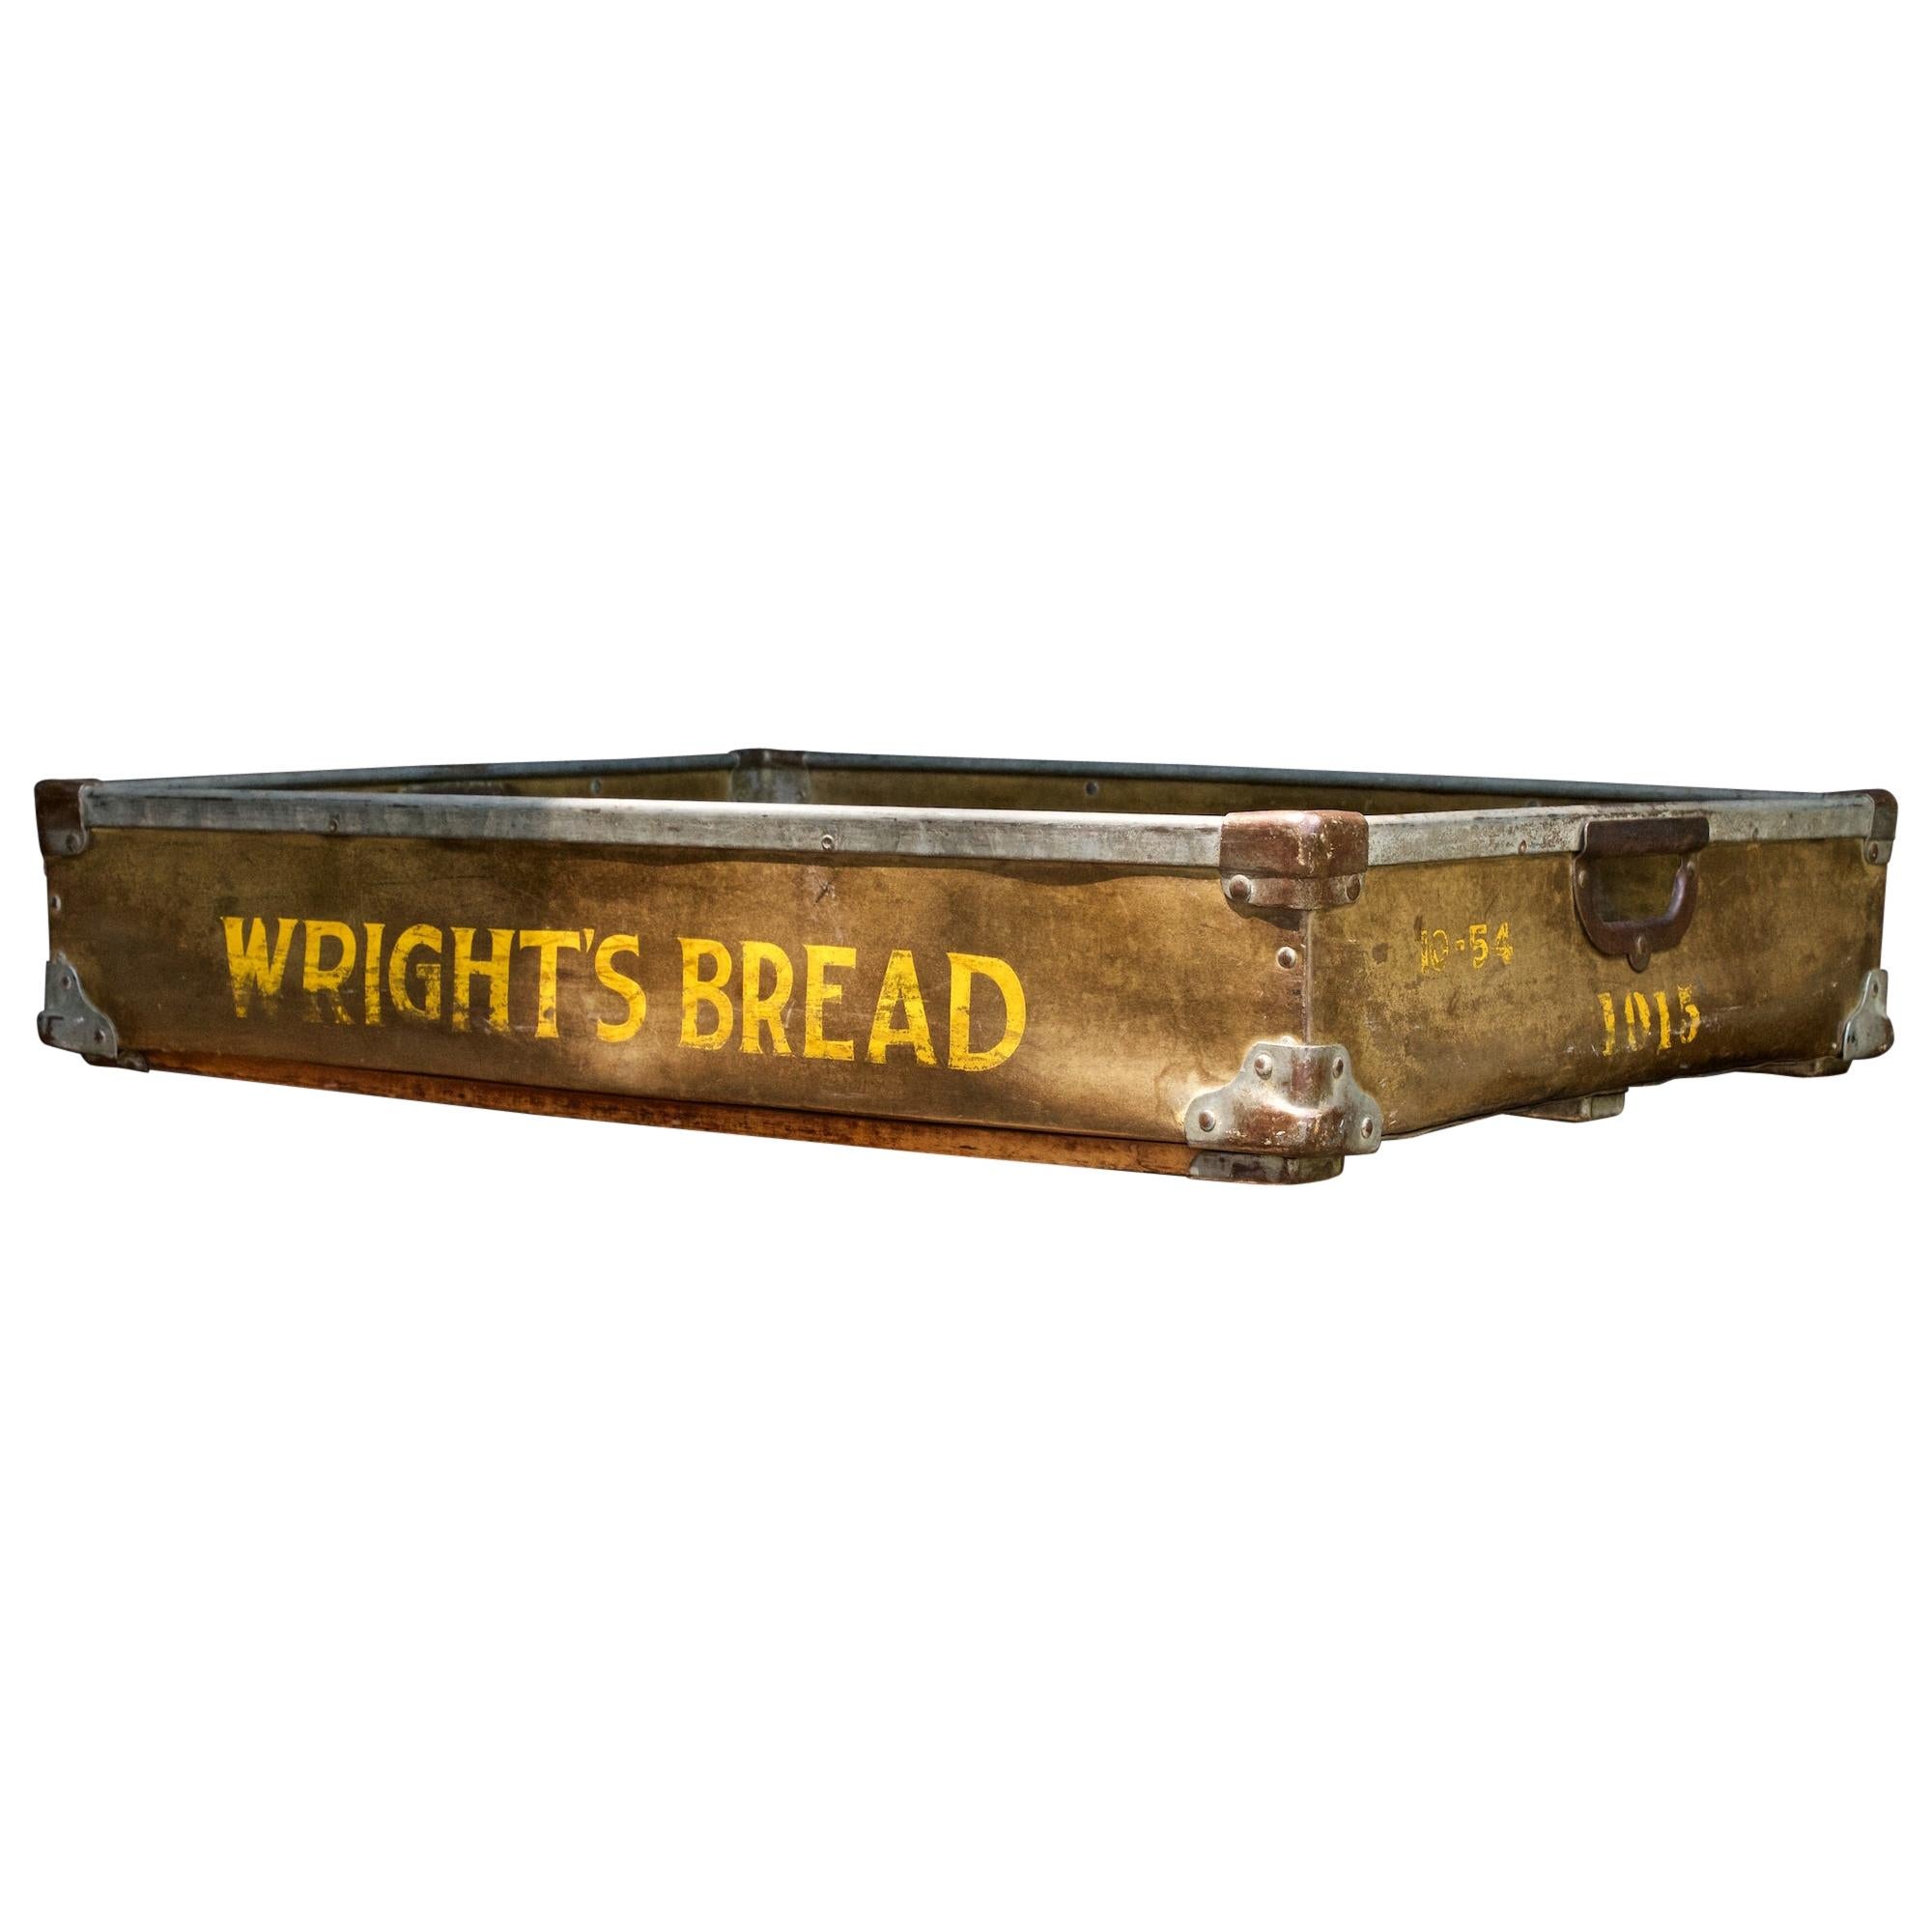 1950s Wrights Bread Crate Vintage Industrial Vulcanized Display Box Basket Tray